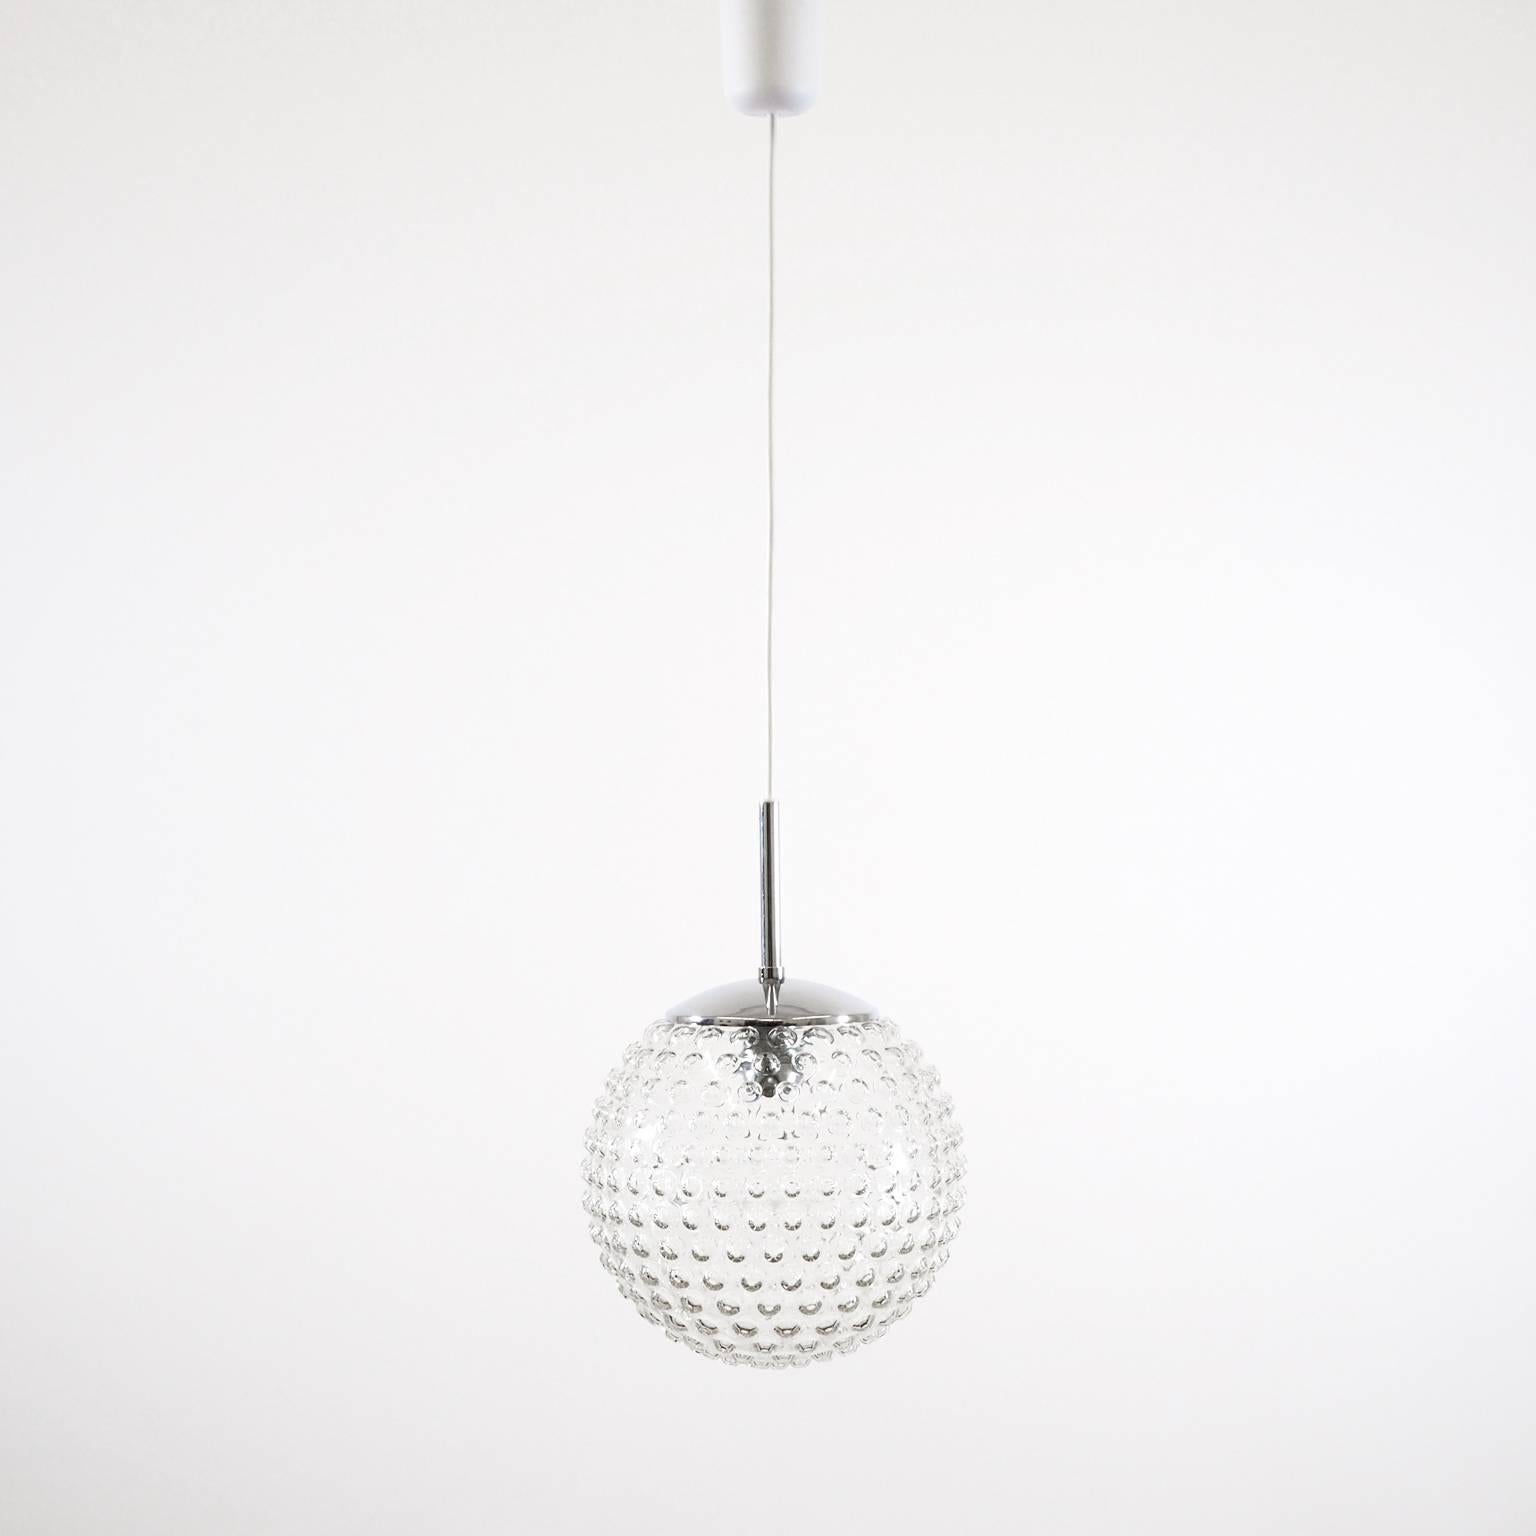 Clear bubble glass pendants with chrome hardware by Staff Leuchten, Germany, produced in 1966. Designed by Rolf Krüger, chief designer by Staff from 1965-1970. Excellent condition and stunning space-age light effect. One E27 socket (100W) with new